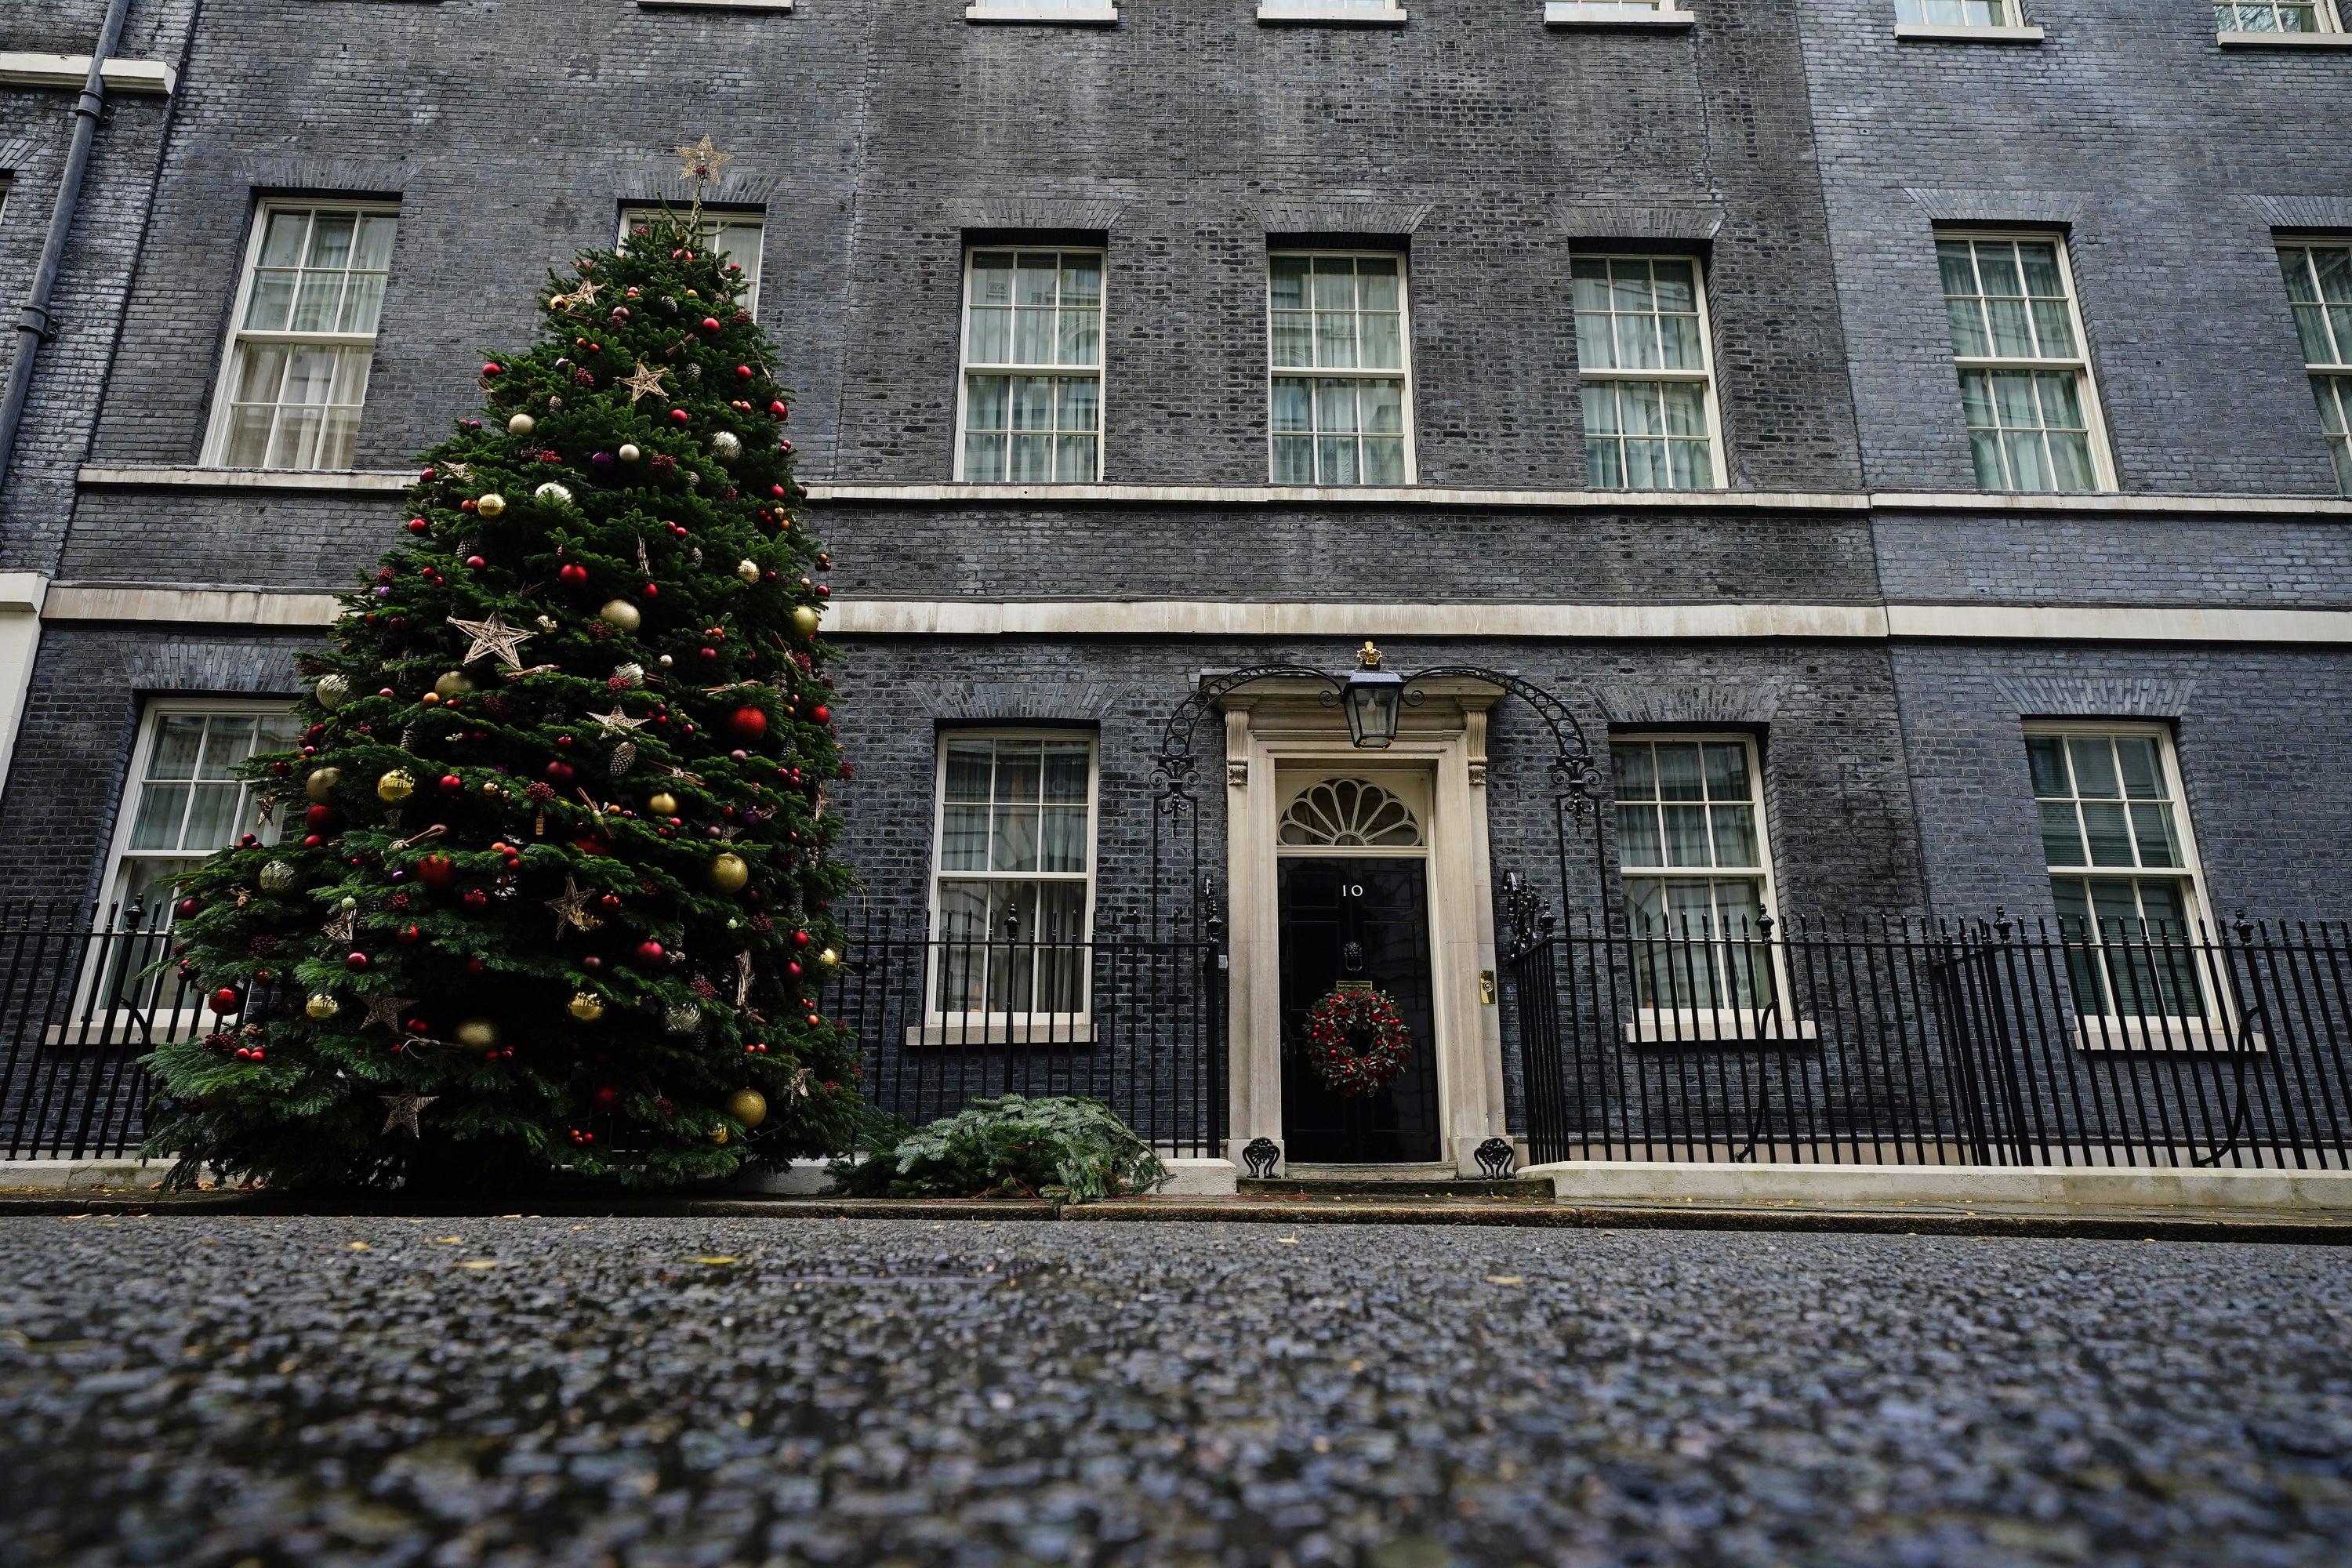 The Christmas tree outside 10 Downing Street (PA)